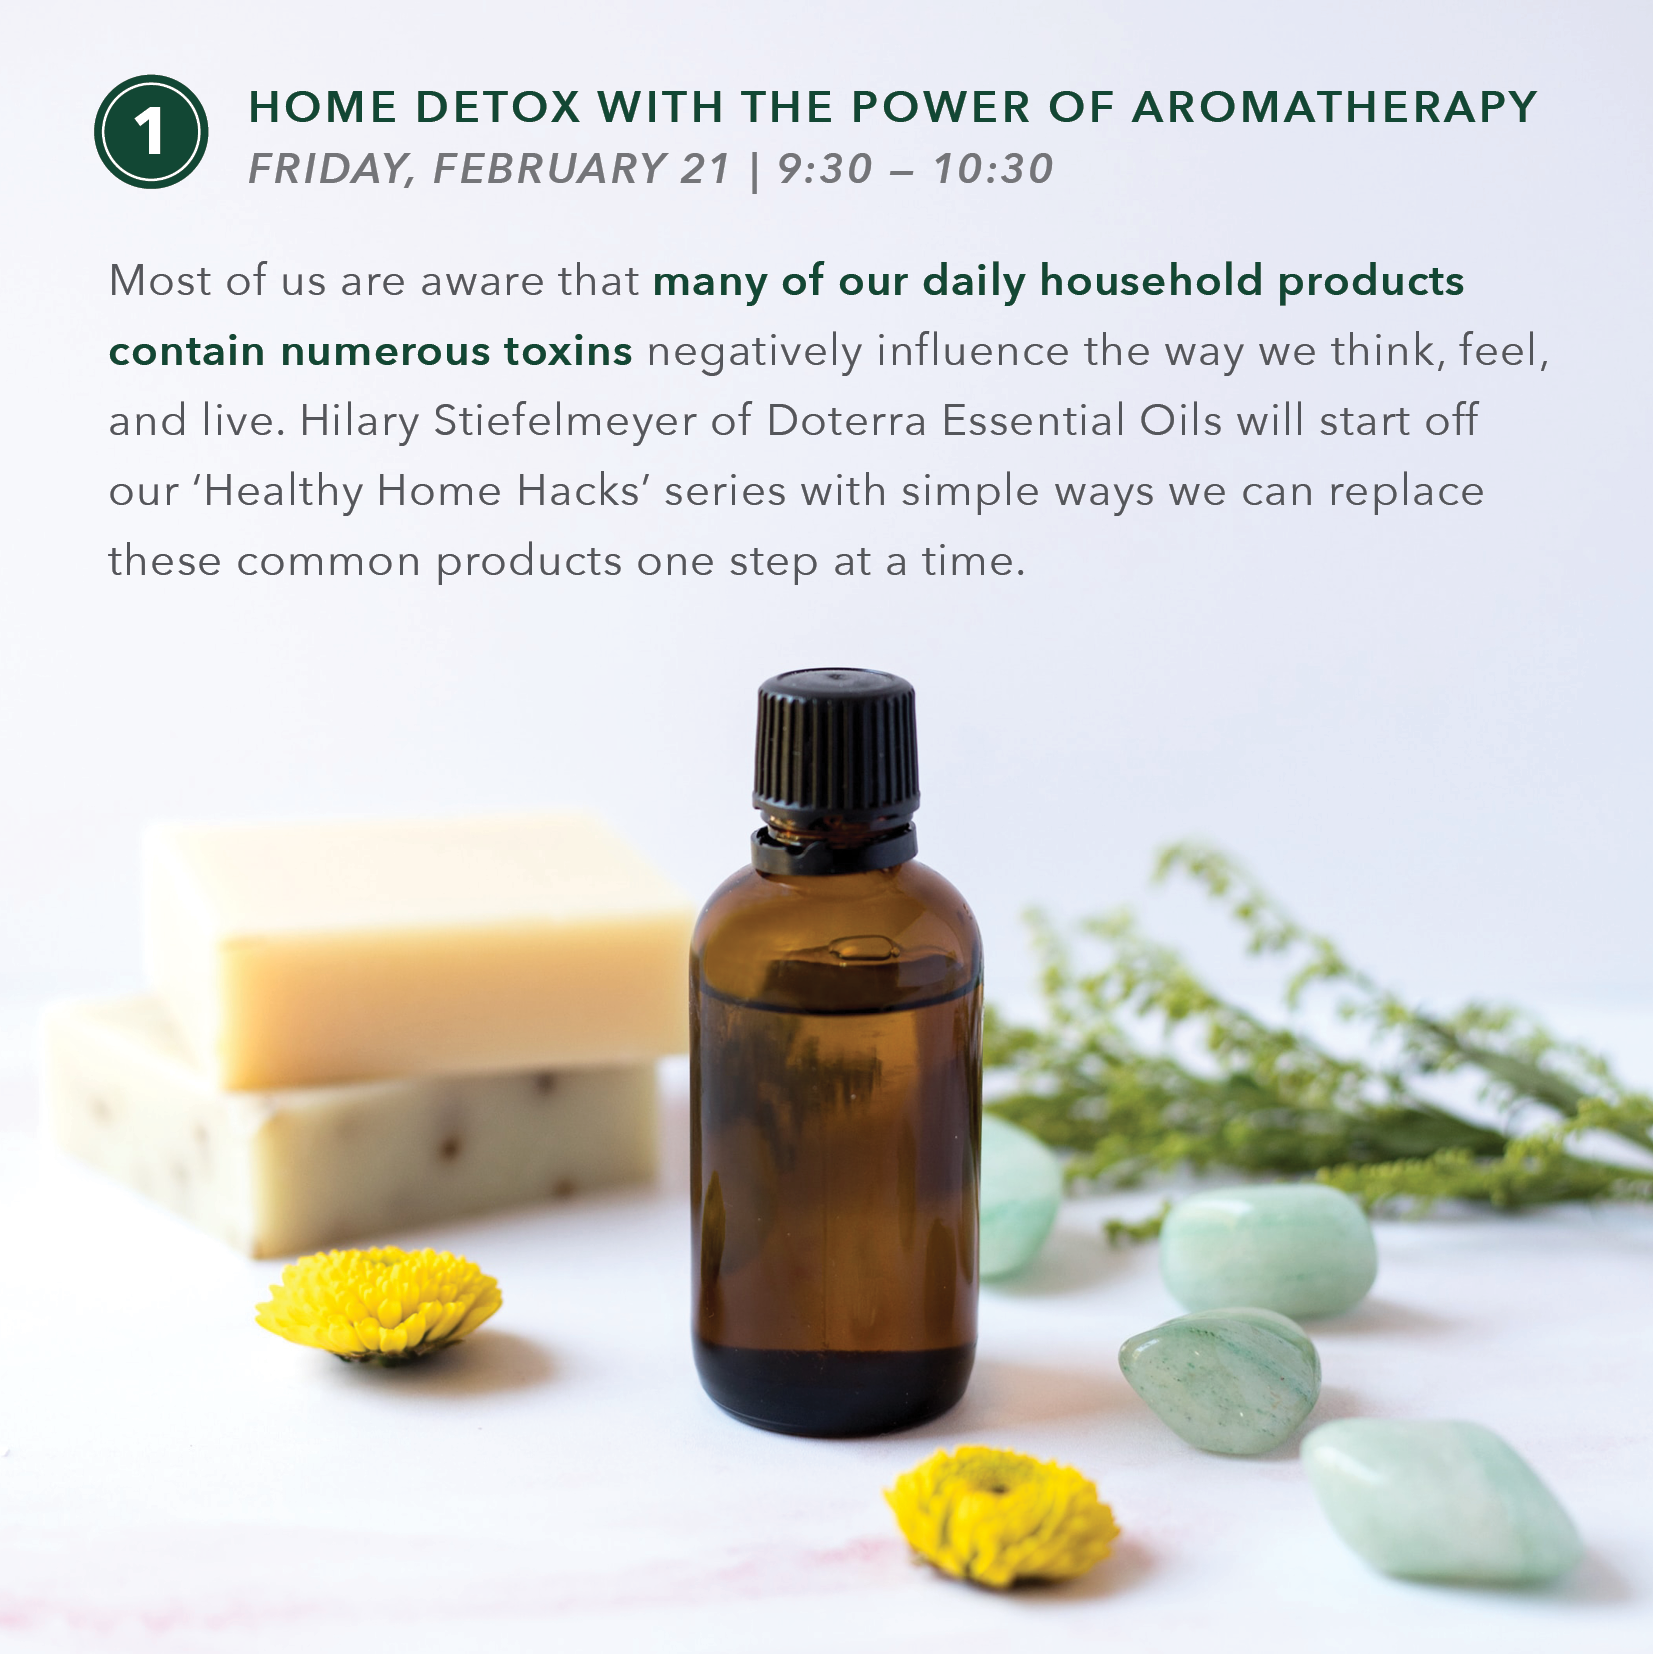 Healthy Home Hacks Part 1: Home Detox with the Power of Aromatherapy